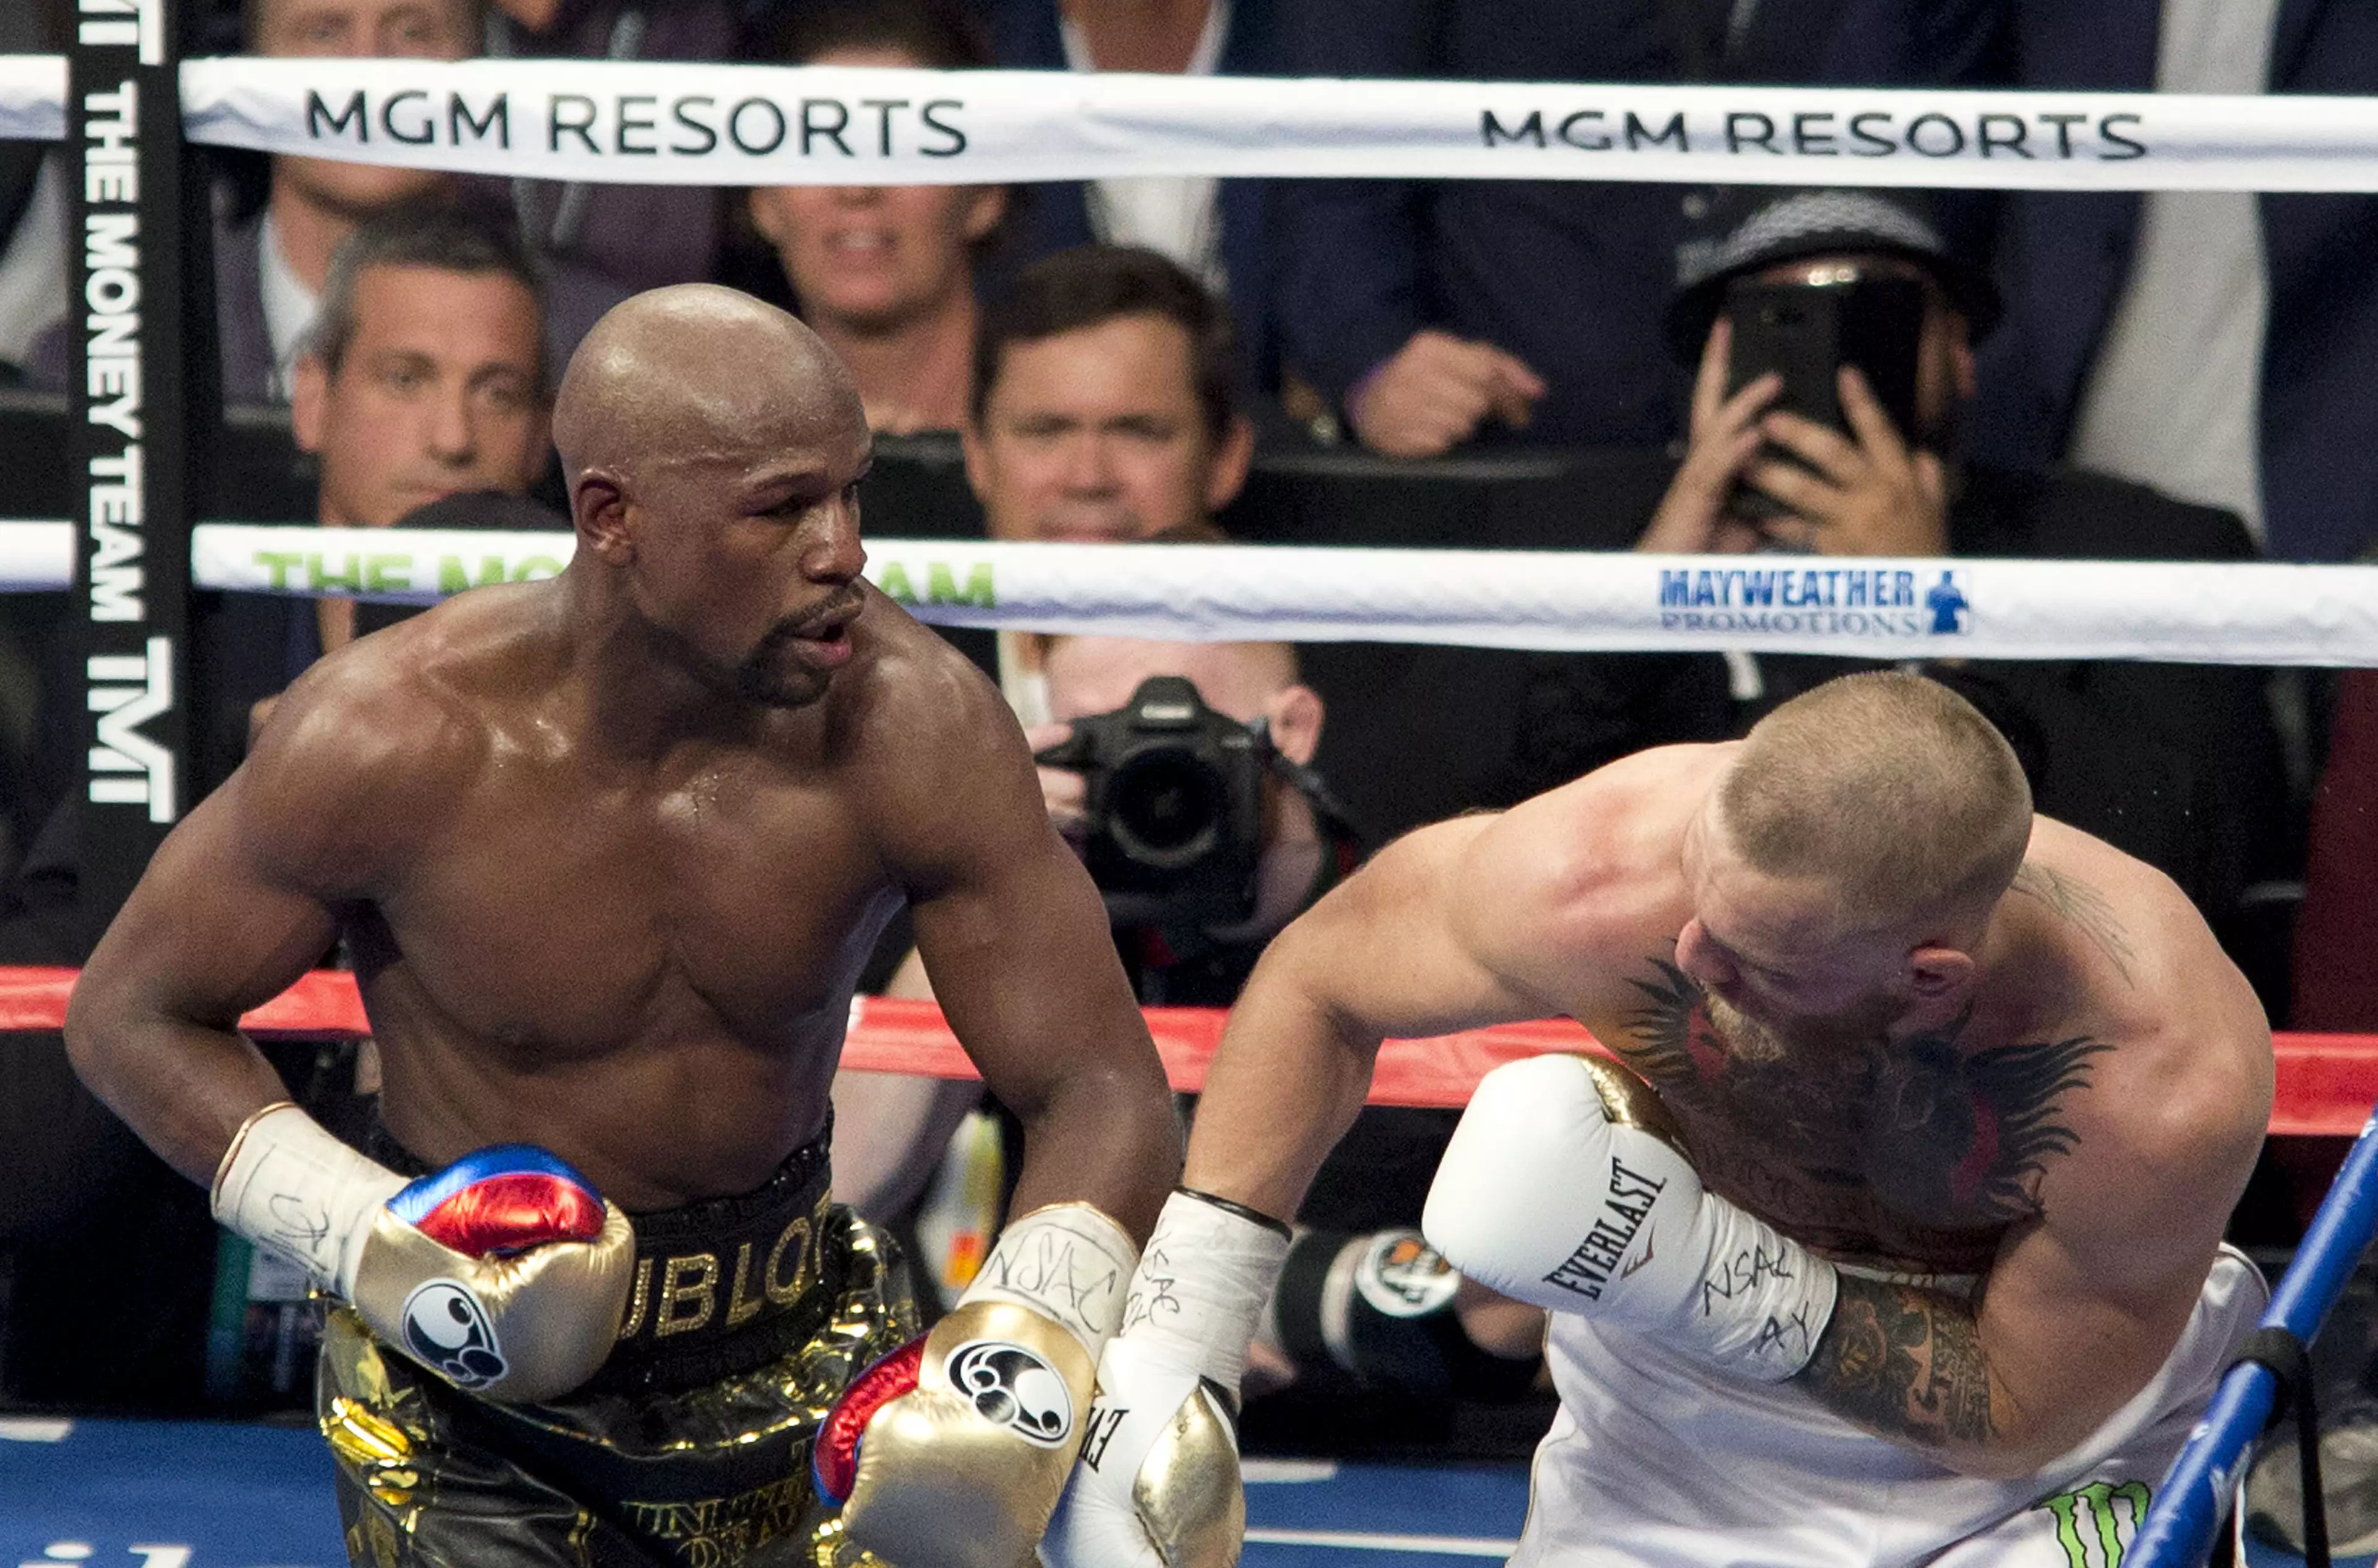 Will Mayweather and McGregor fight again? Image: PA Images